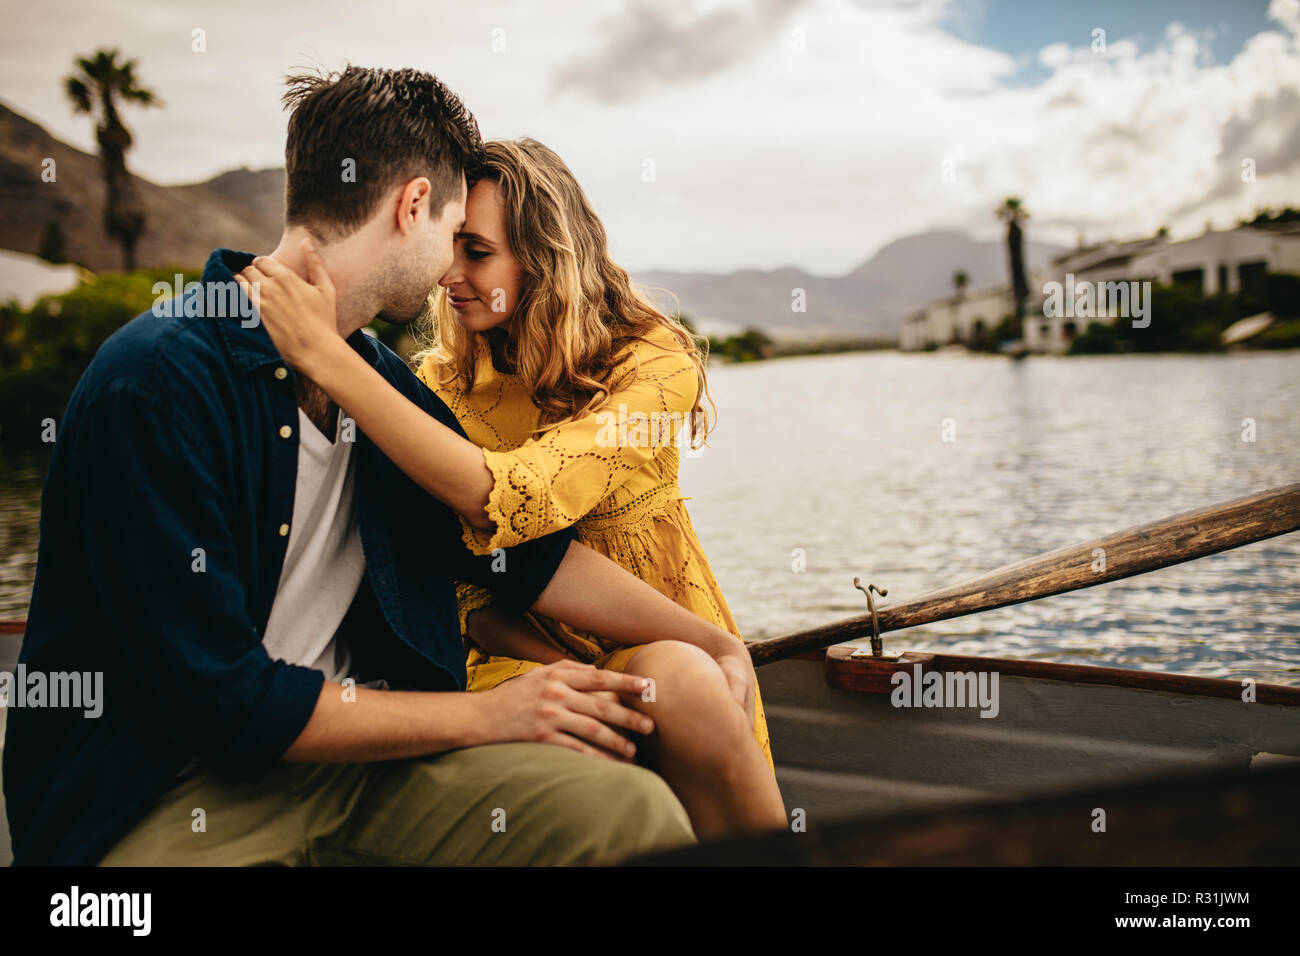 Couple in love sitting together in a boat holding each other. Woman holding her boyfriend touching their heads sitting in a boat during a date. Stock Photo